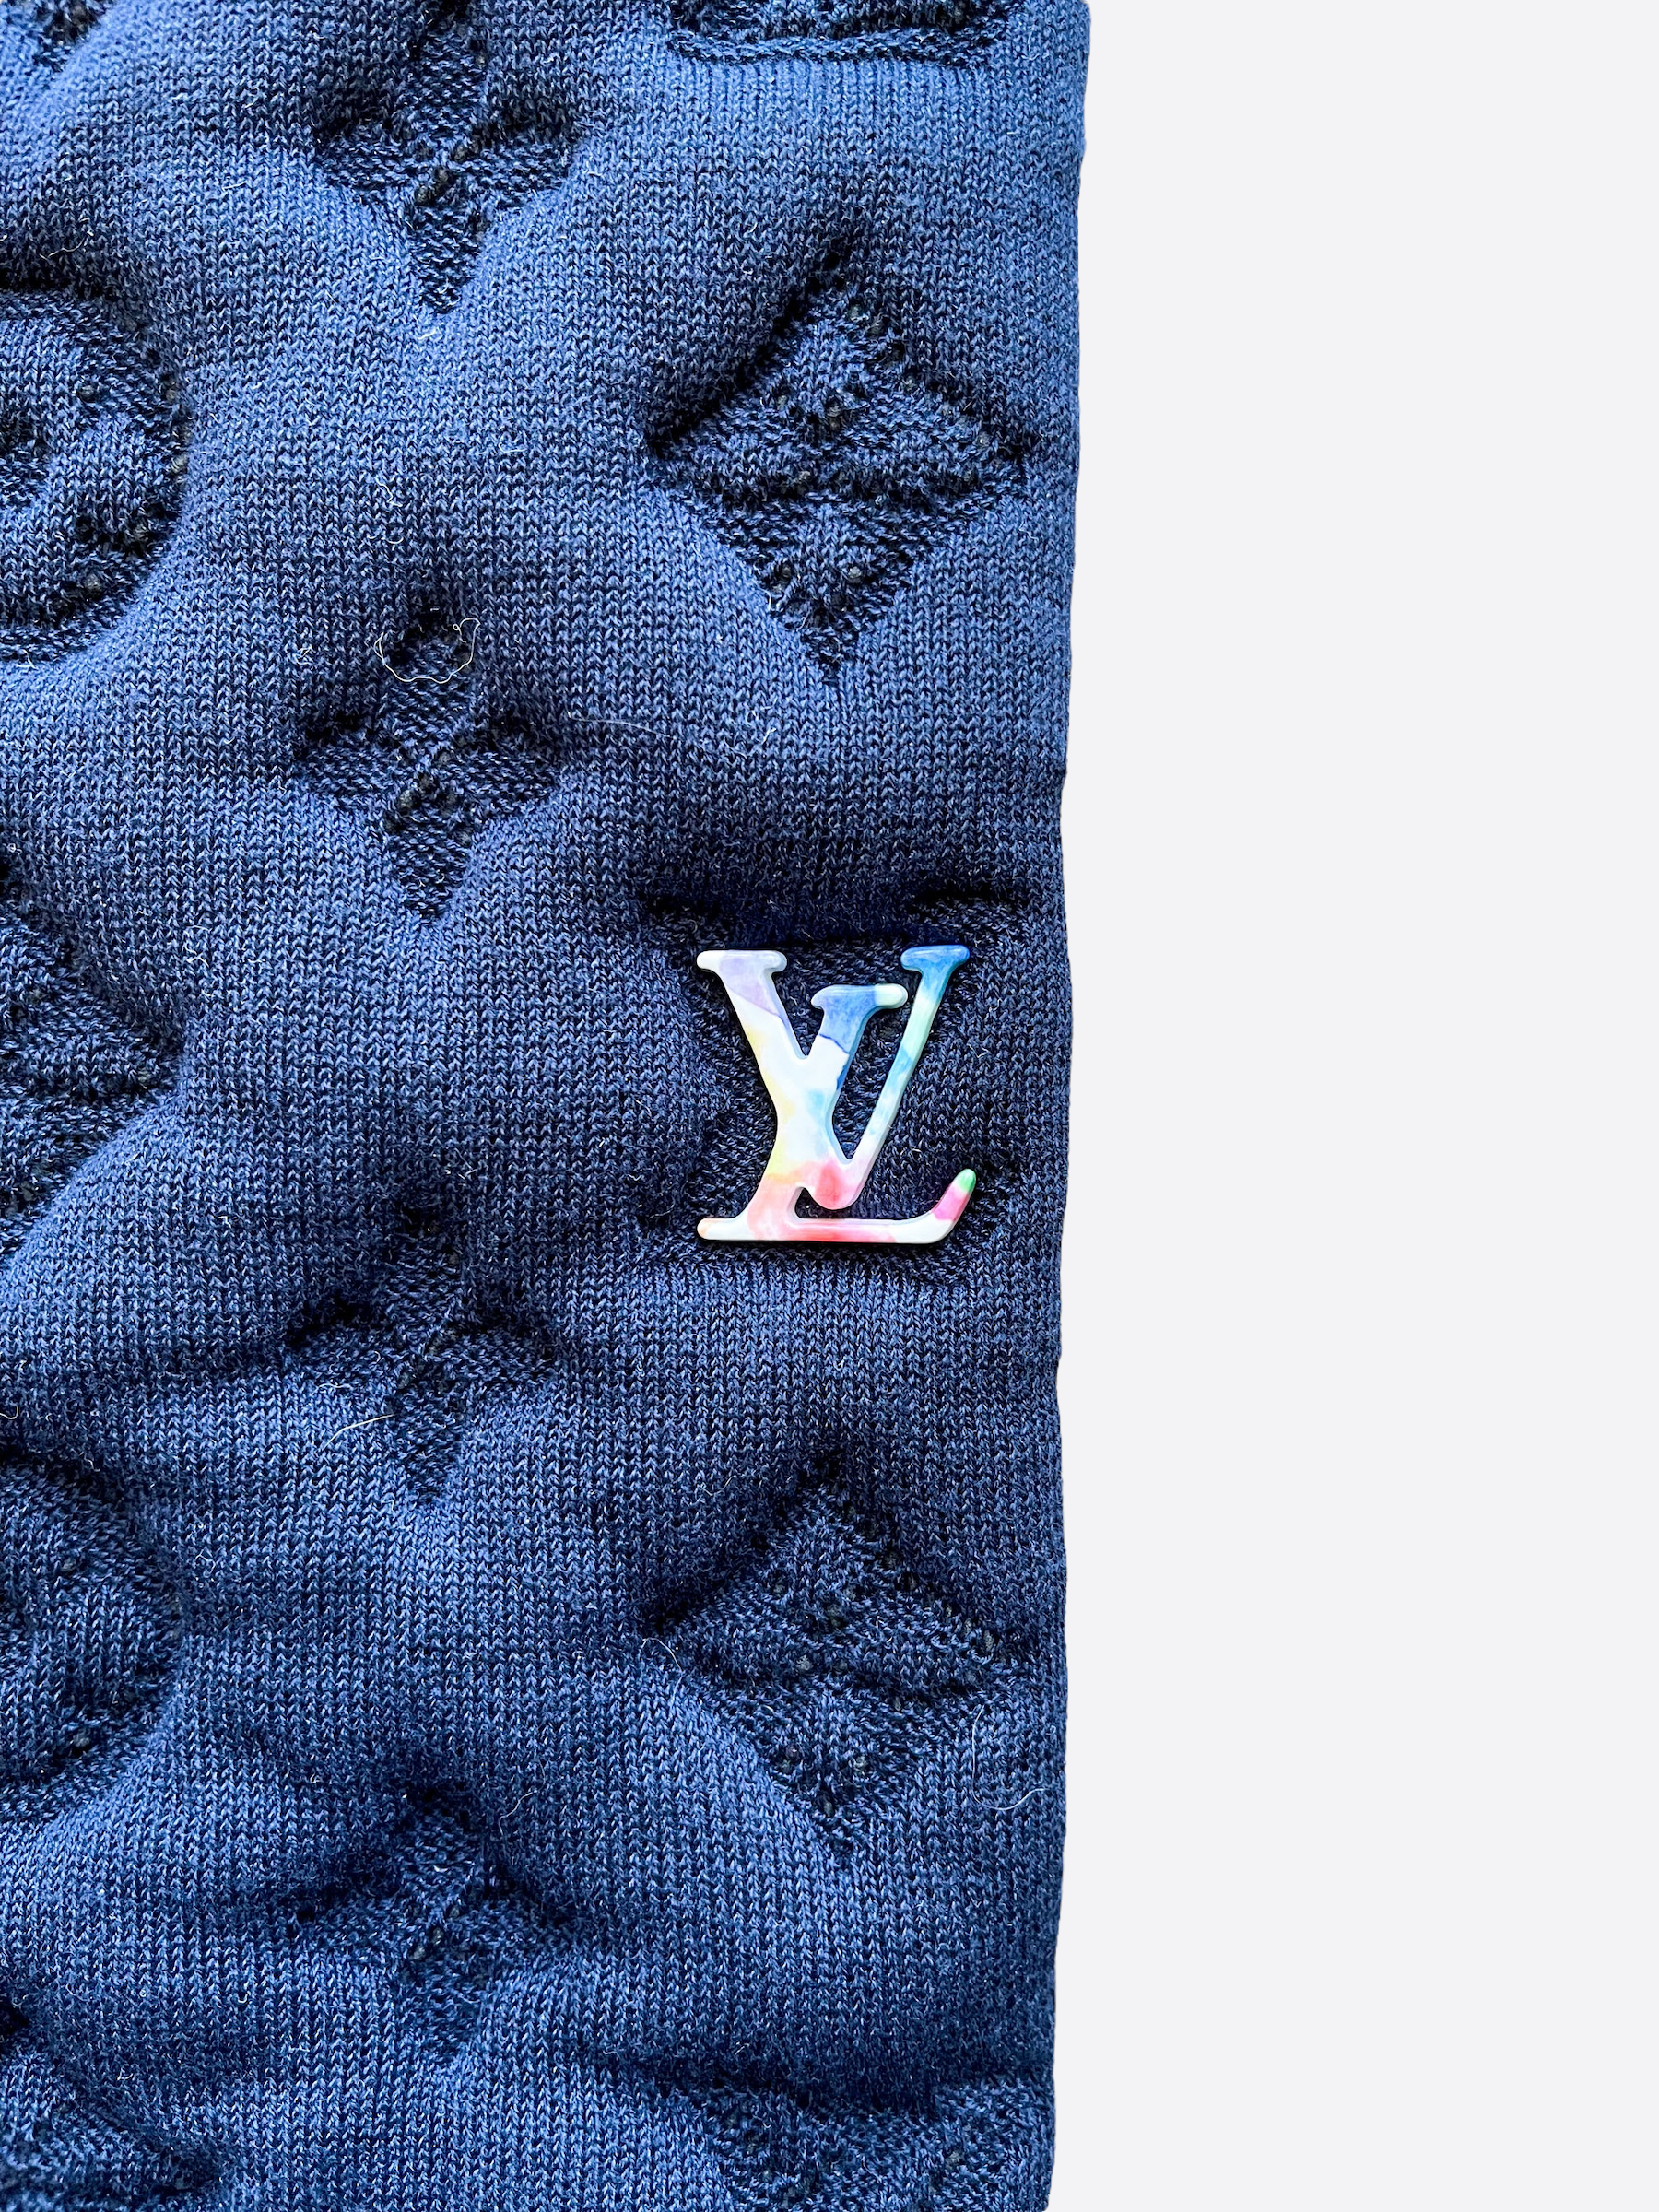 Shop Louis Vuitton 2022 SS Monogram bomber jacket (1A8QYW) by SkyNS